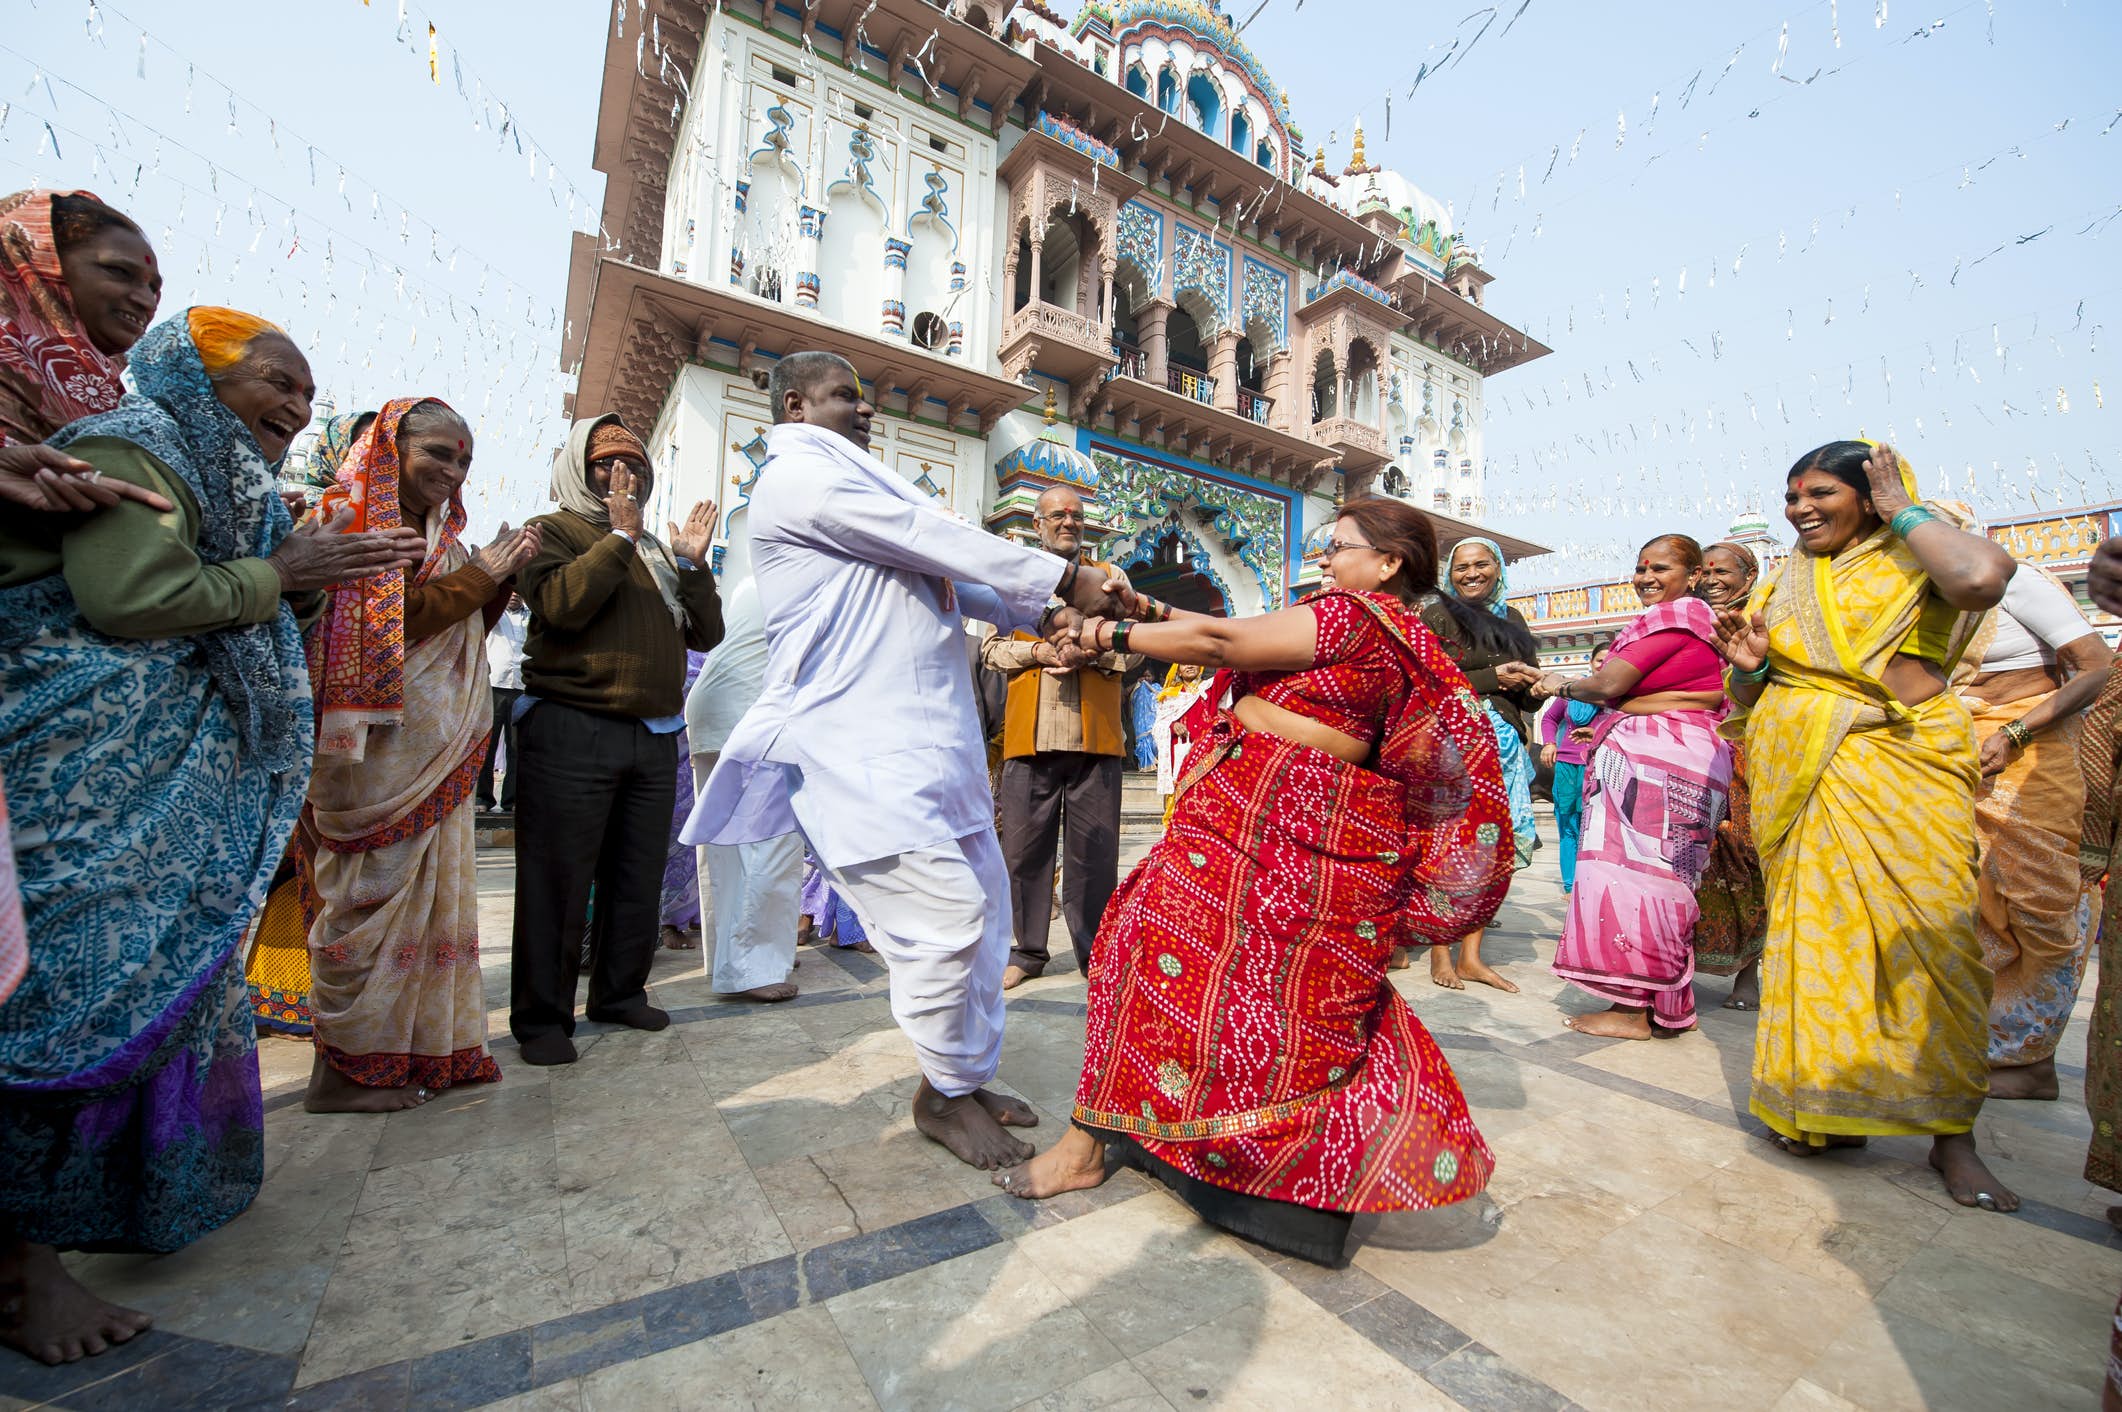 Hindu pilgrims laugh and smile as a couple dances in a circle of onlookers